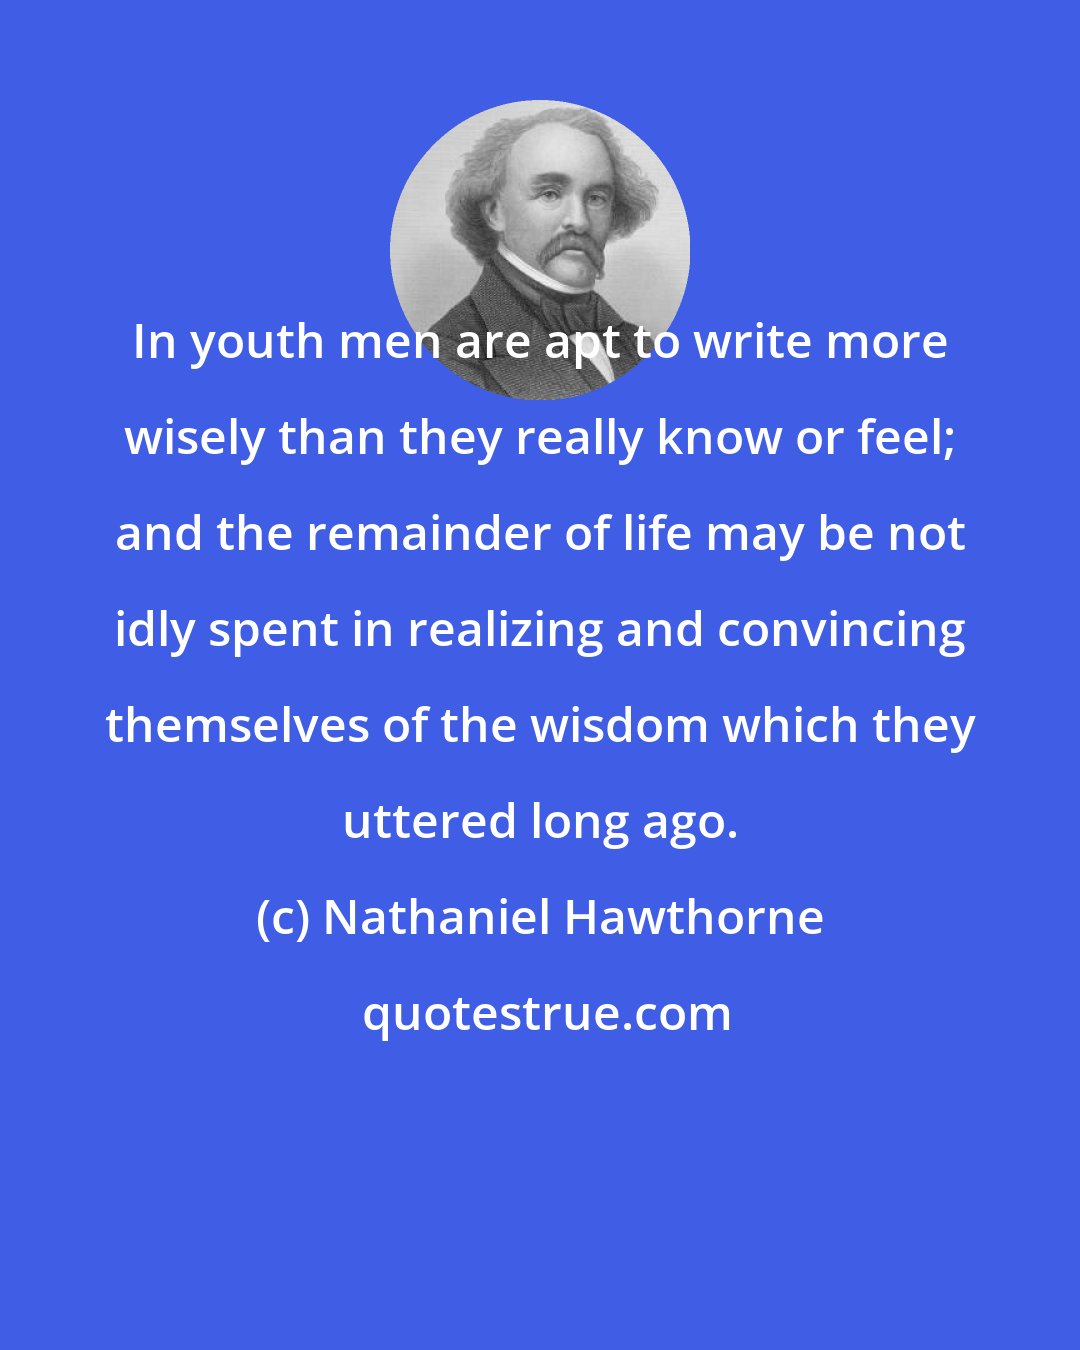 Nathaniel Hawthorne: In youth men are apt to write more wisely than they really know or feel; and the remainder of life may be not idly spent in realizing and convincing themselves of the wisdom which they uttered long ago.